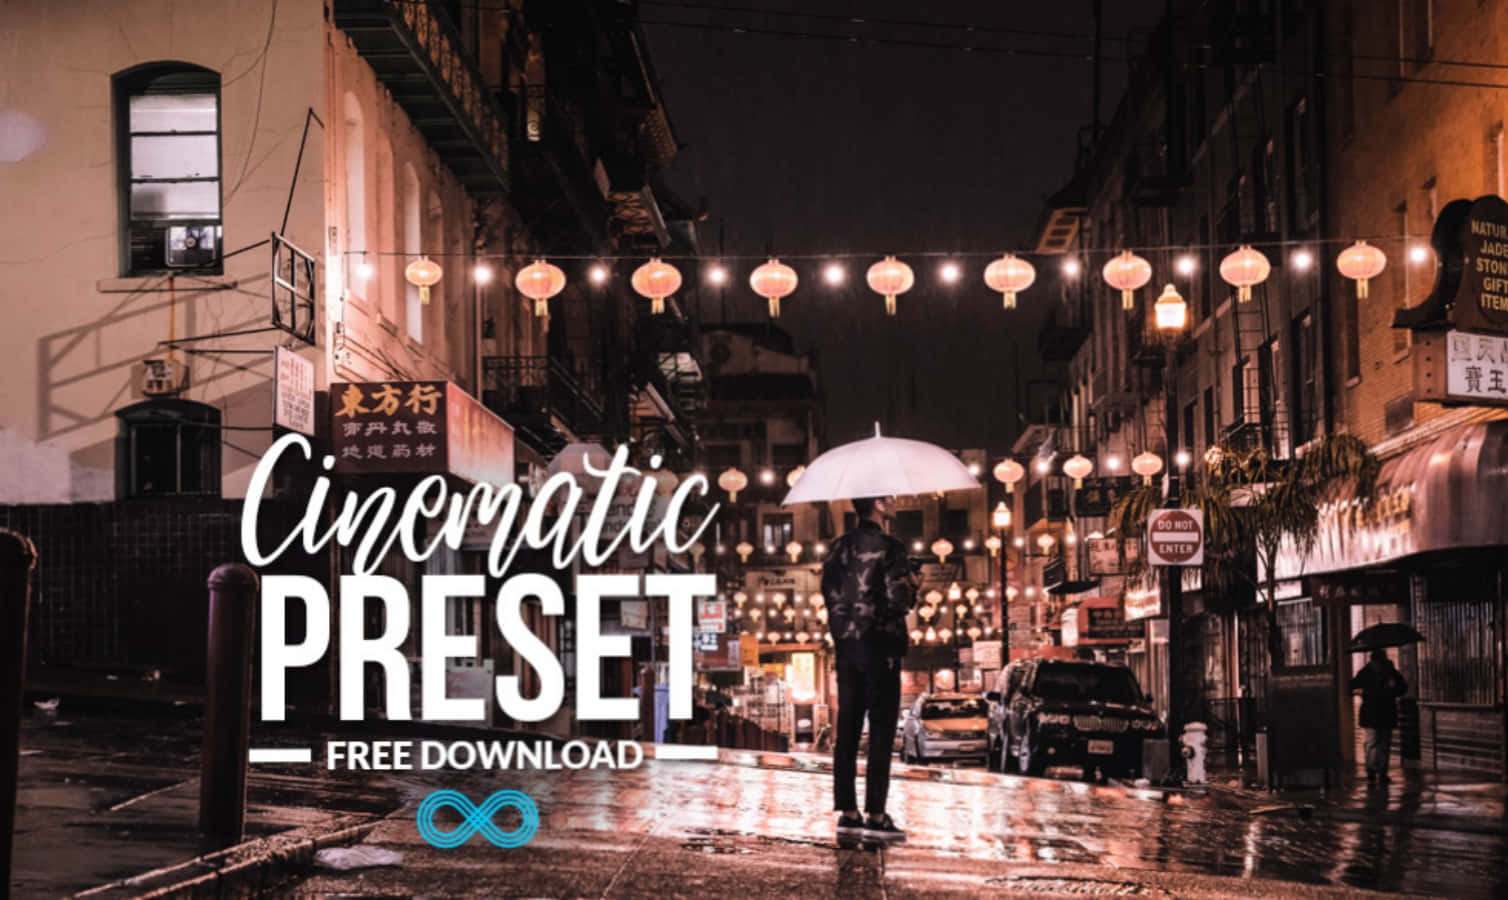 Get the professional look for your photos using Lightroom presets